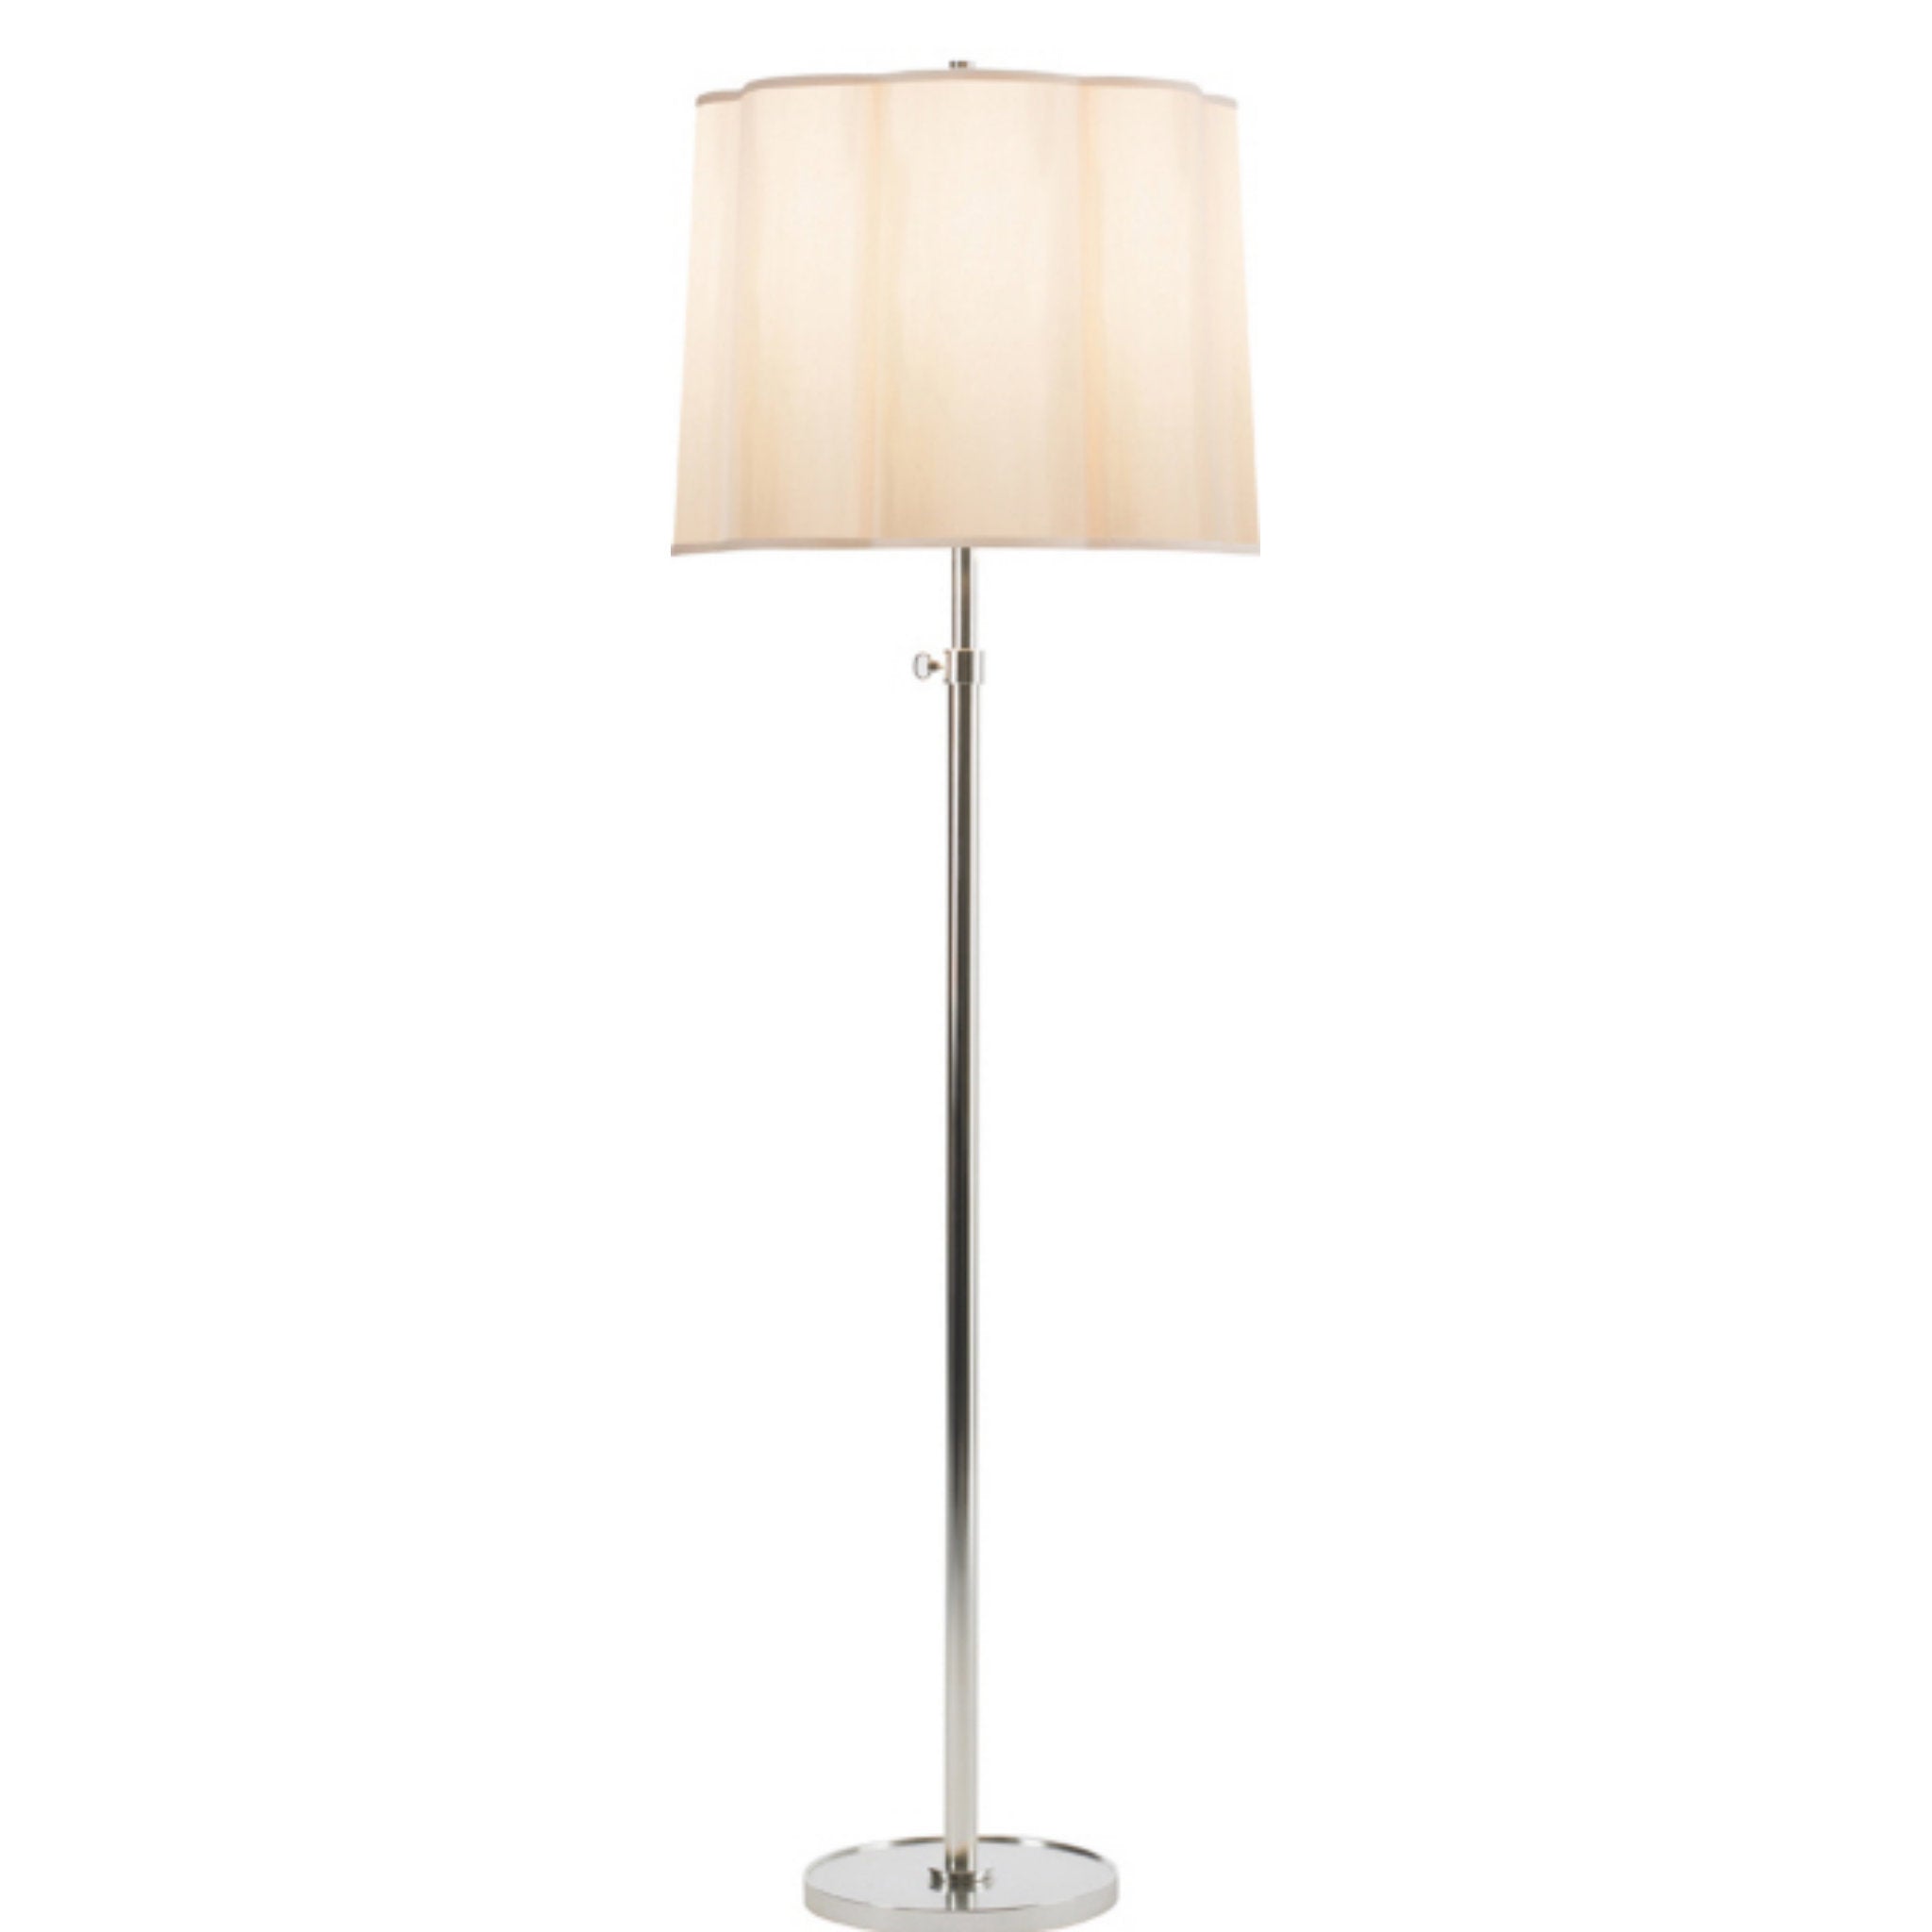 Barbara Barry Simple Floor Lamp in Soft Silver with Silk Scalloped Shade